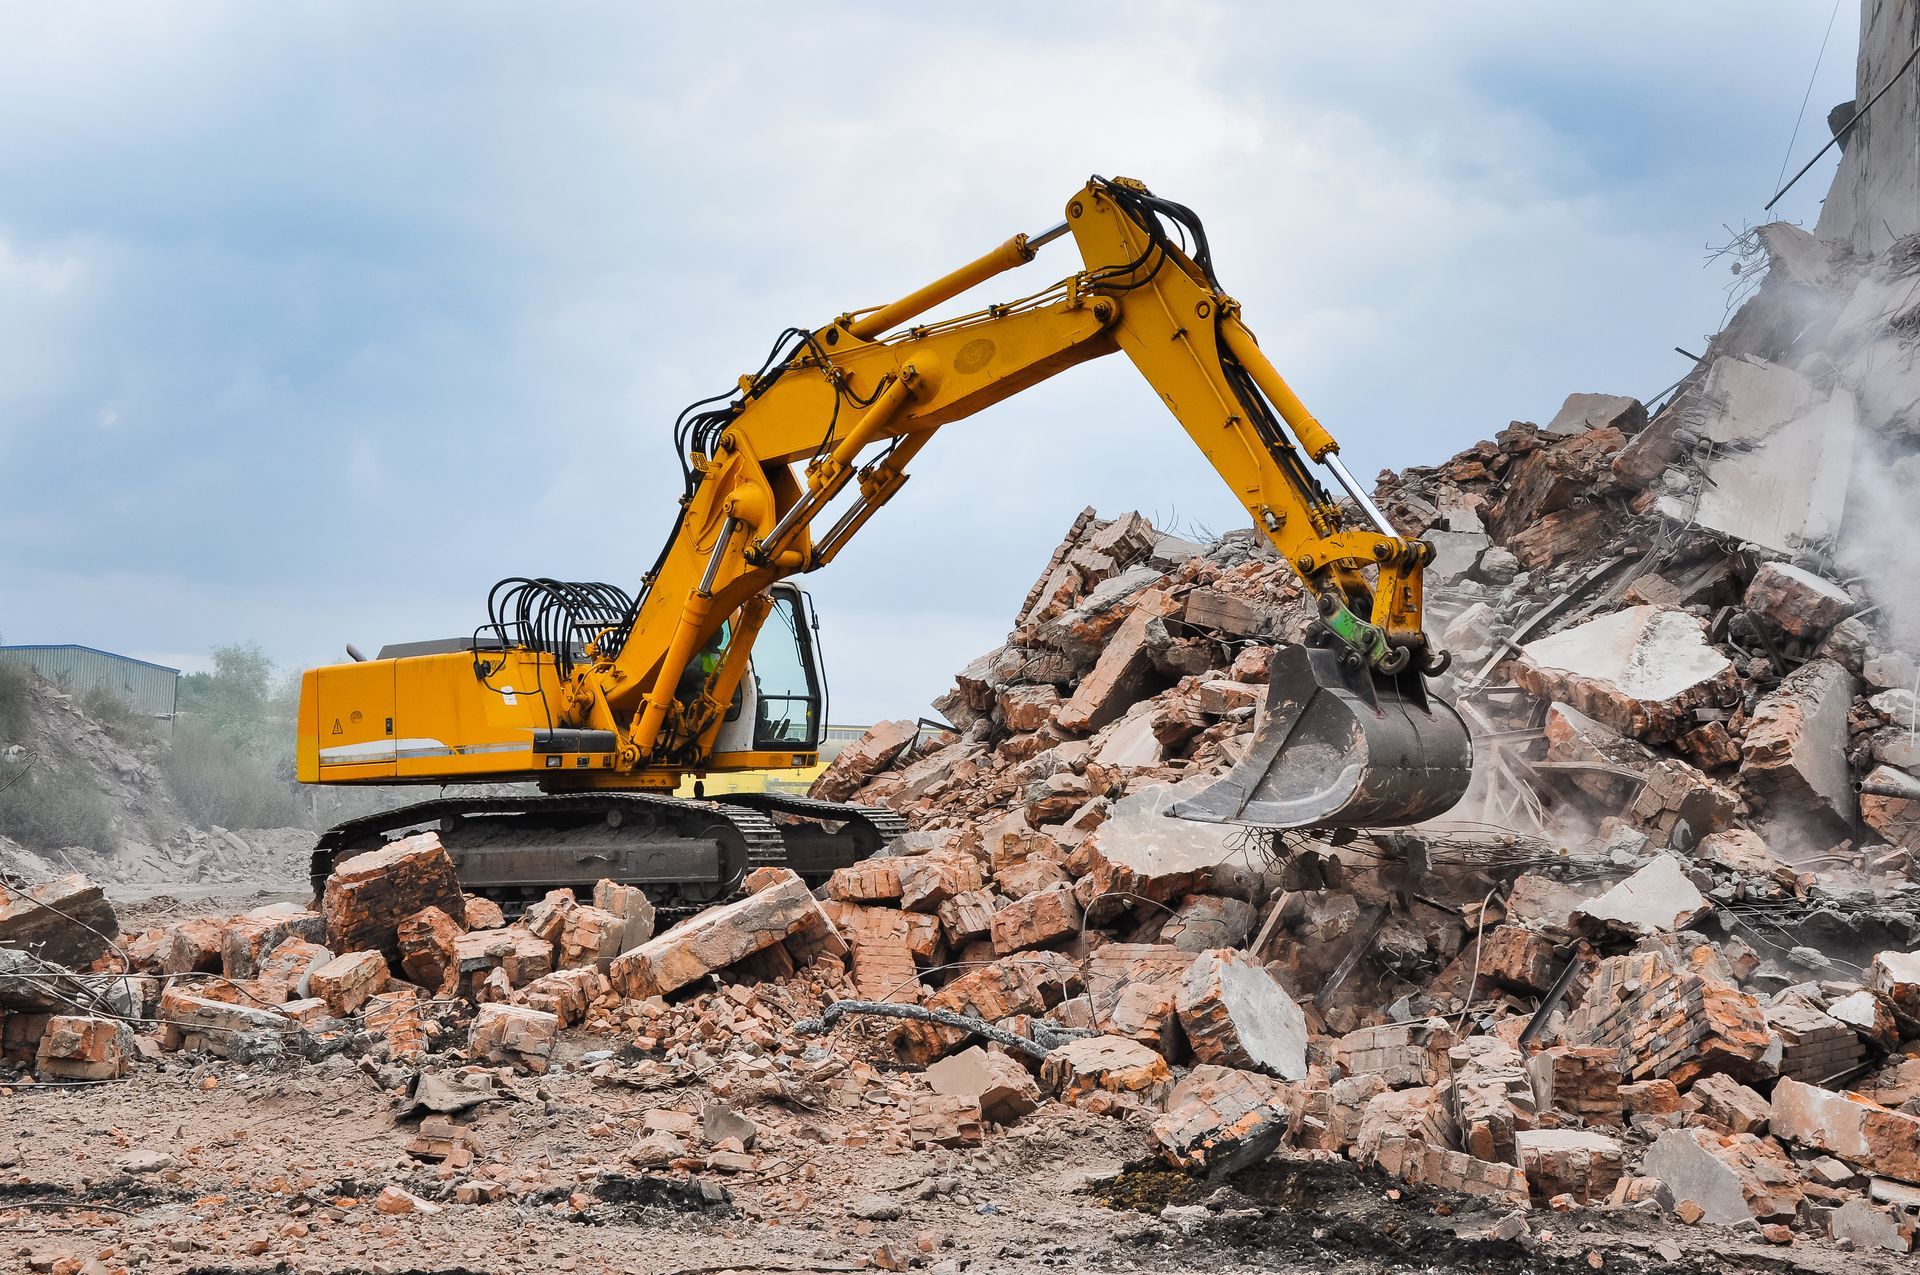 Excavator demolishing an old industrial building, with debris flying in the air.